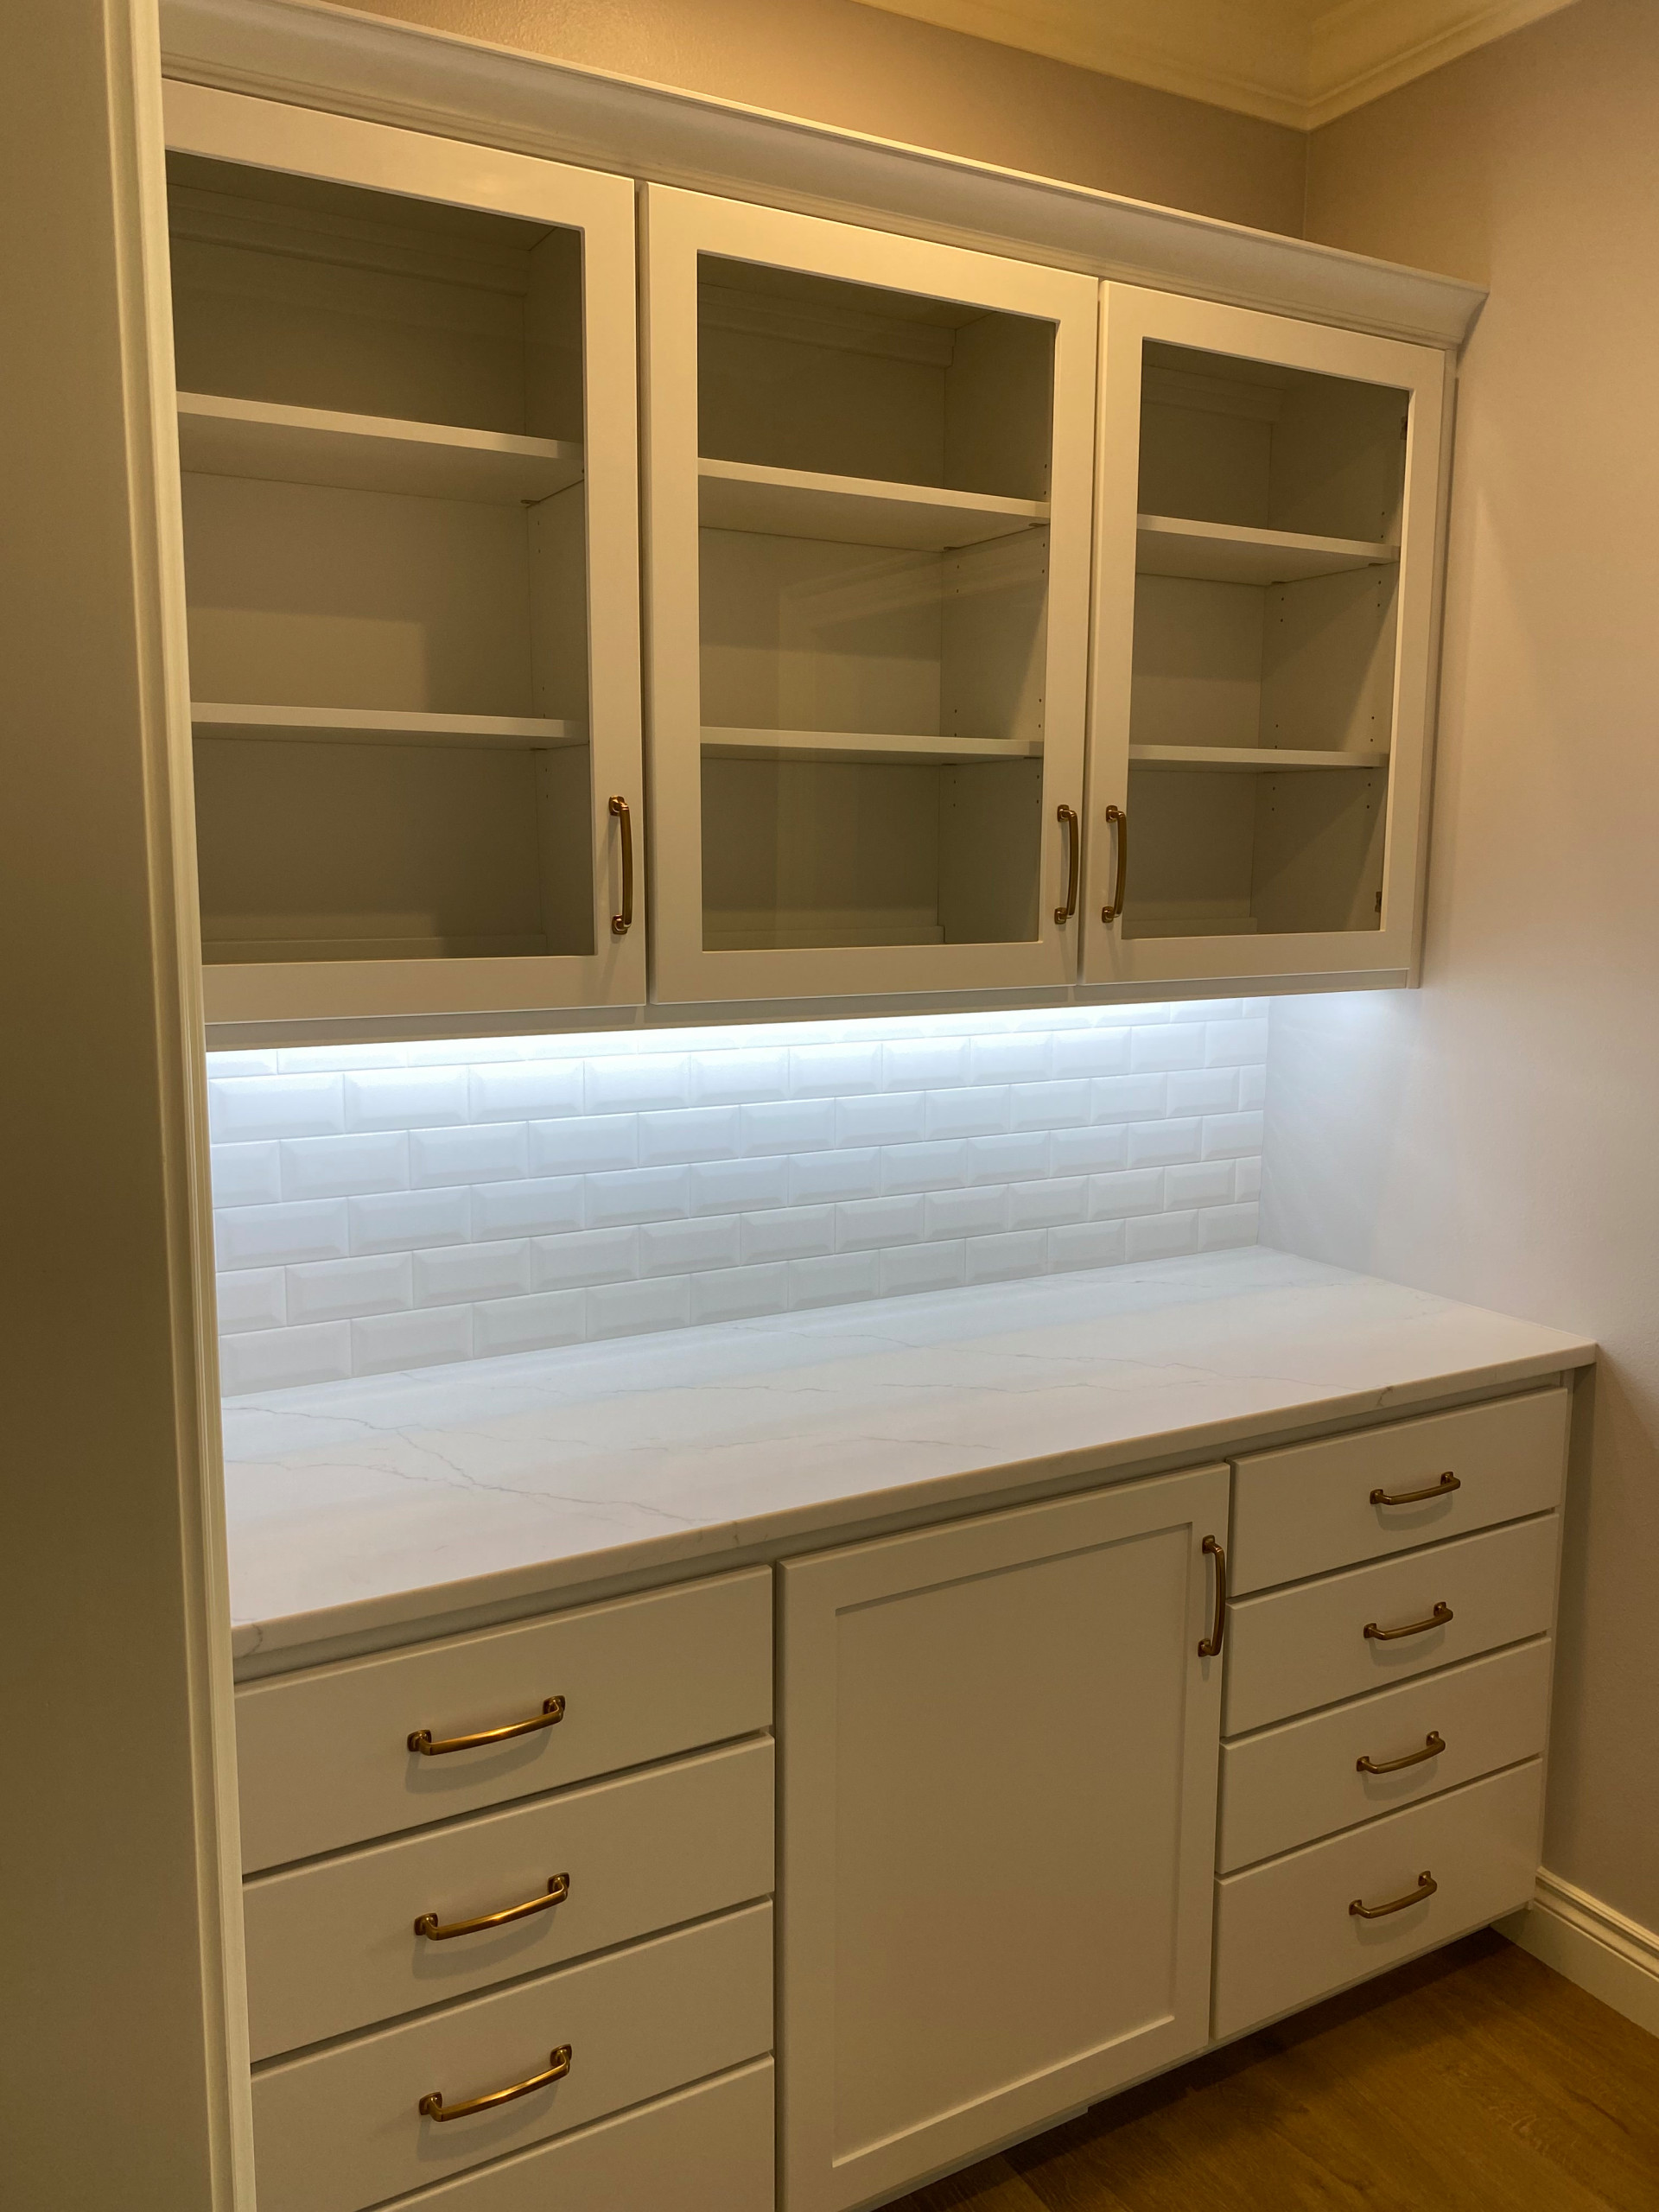 Butlers pantry with white painted custom cabinetry, quartz countertop, and subwa